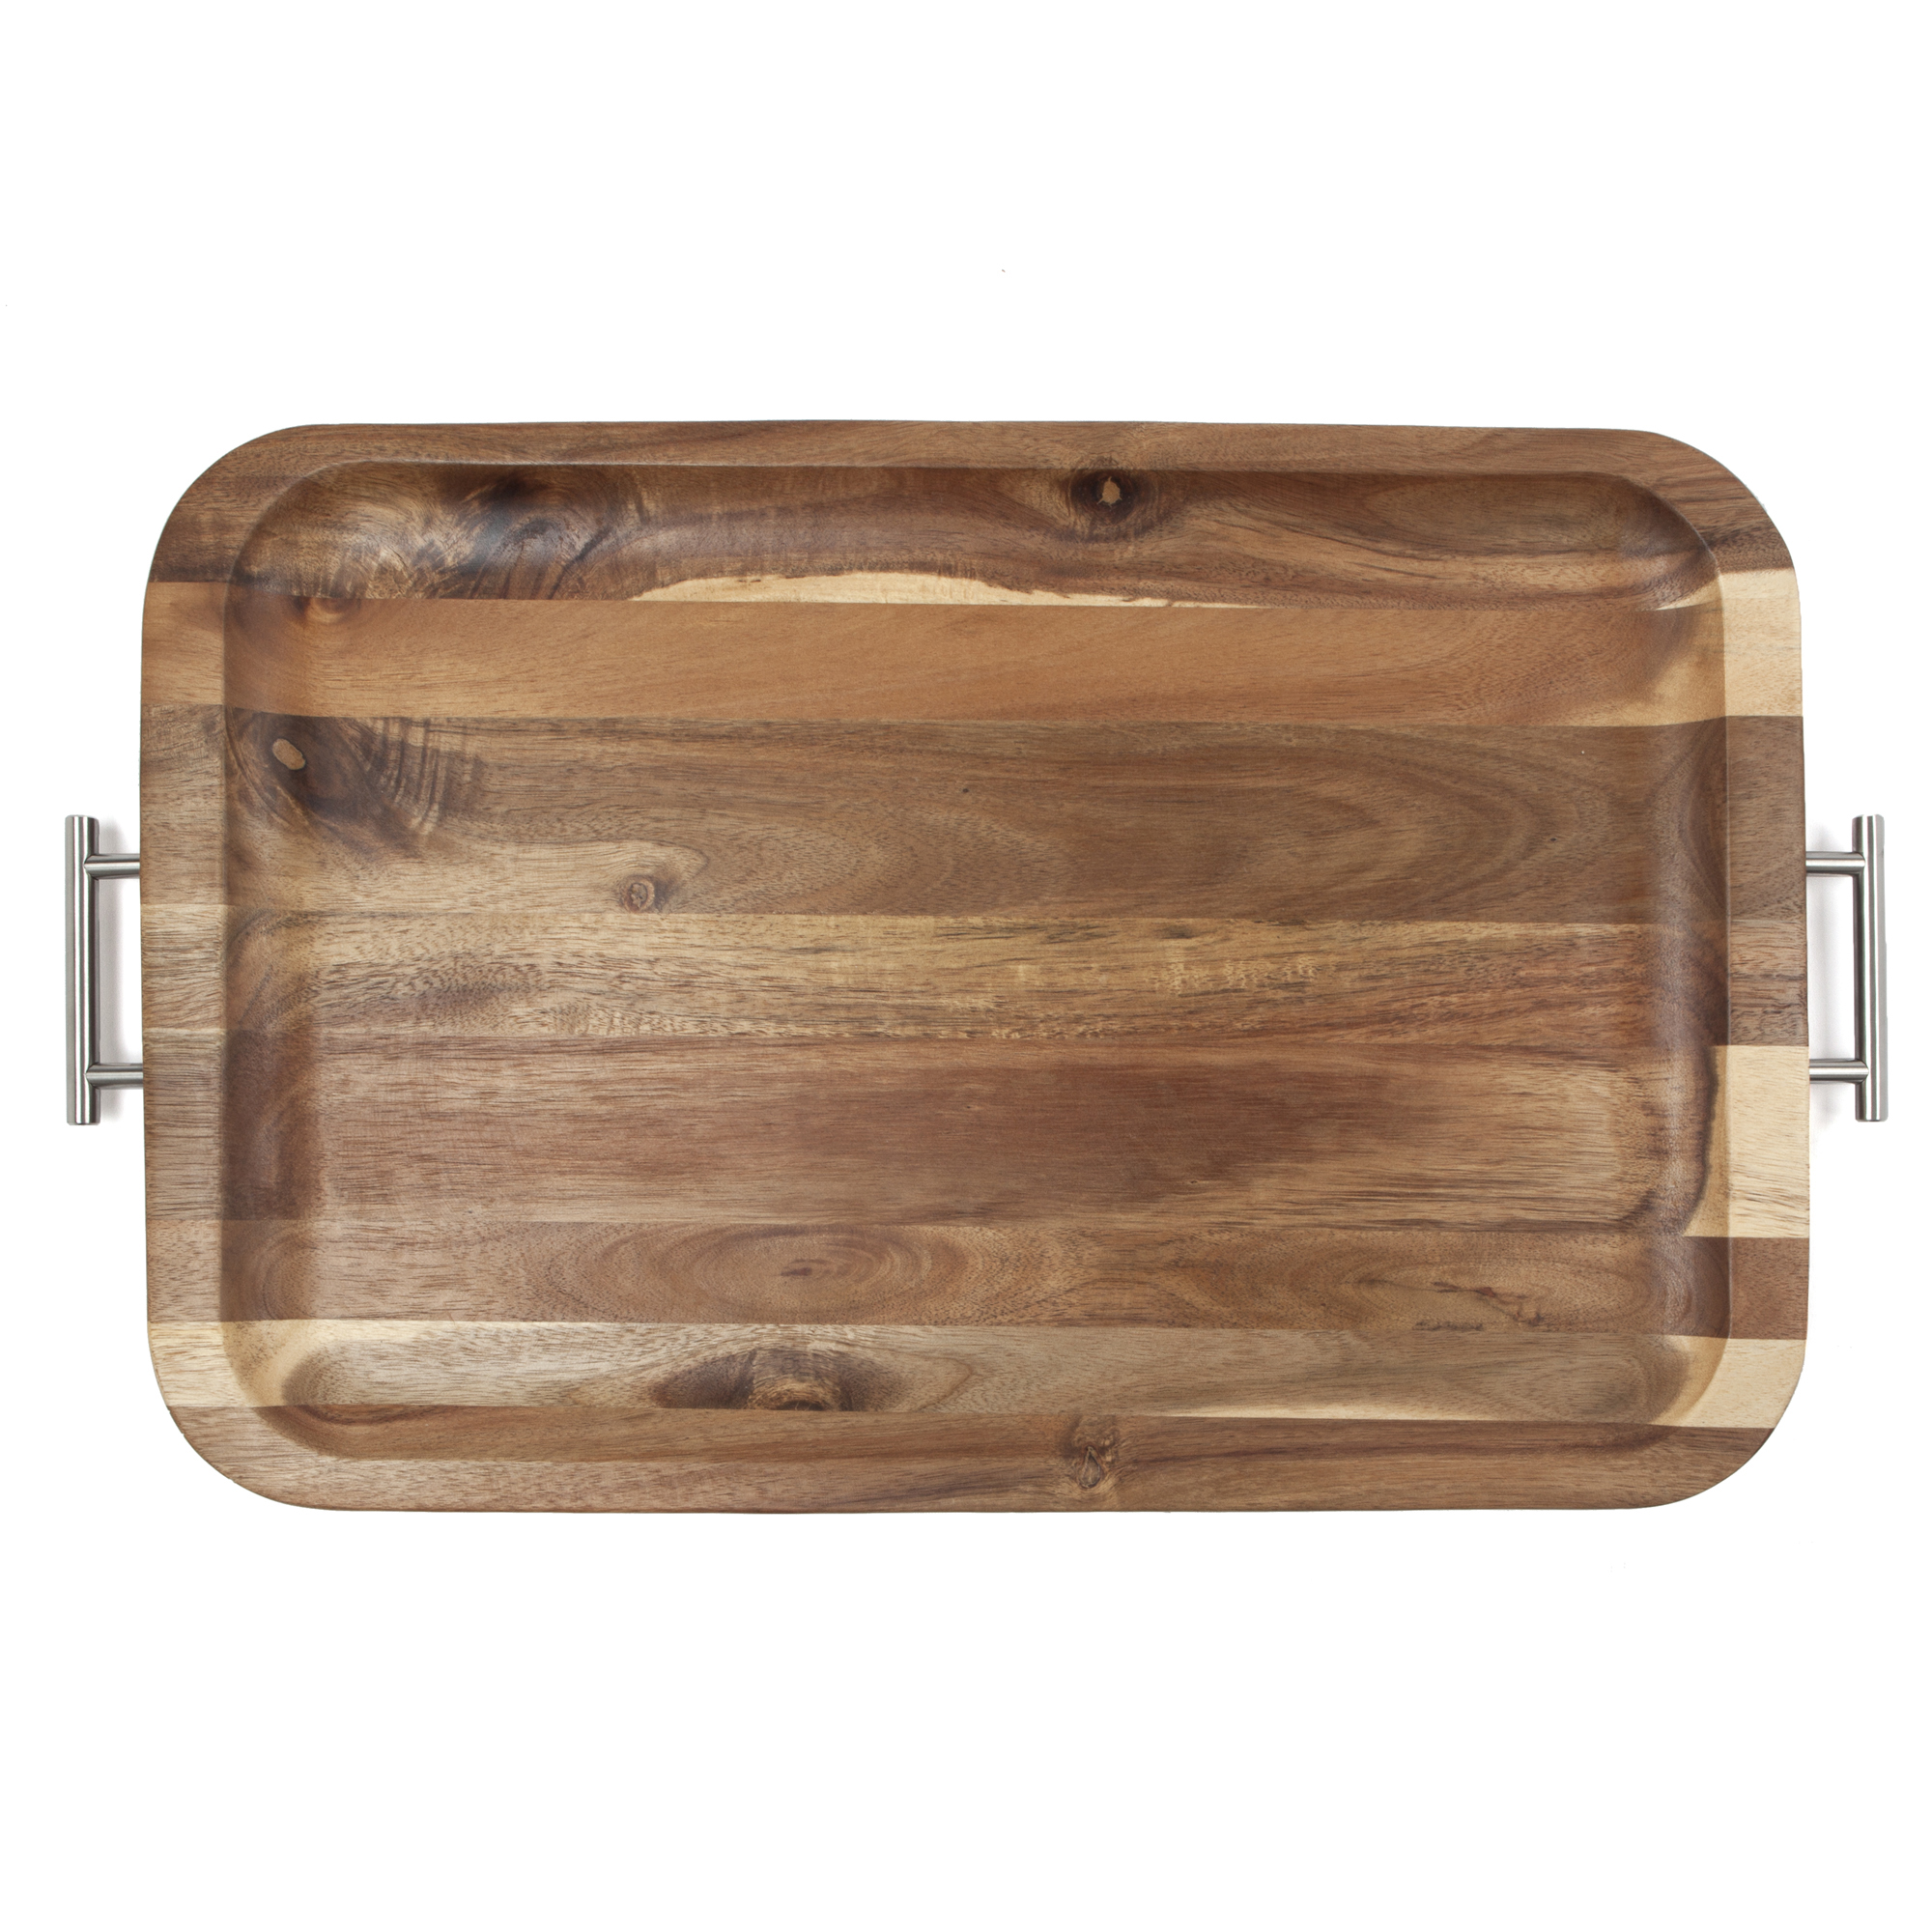 Better Homes & Gardens Acacia Wood Serving Tray with Silver Handles - image 1 of 4